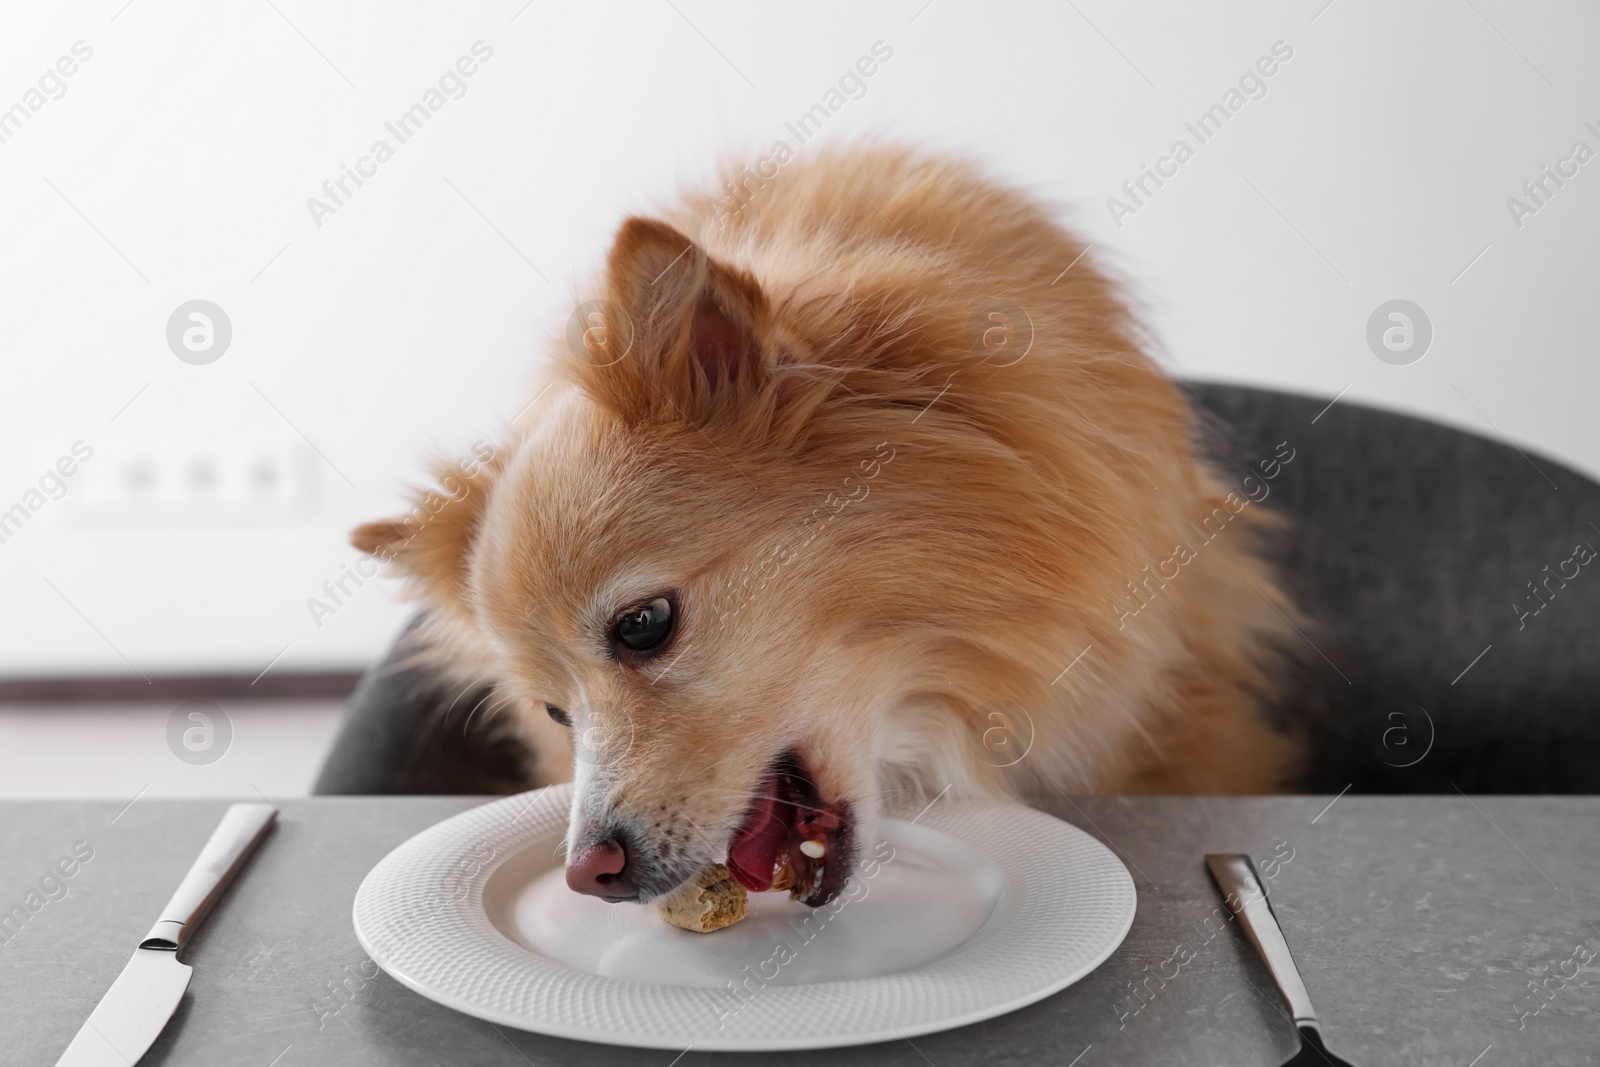 Photo of Cute Pomeranian spitz dog eating biscuit from plate at table indoors